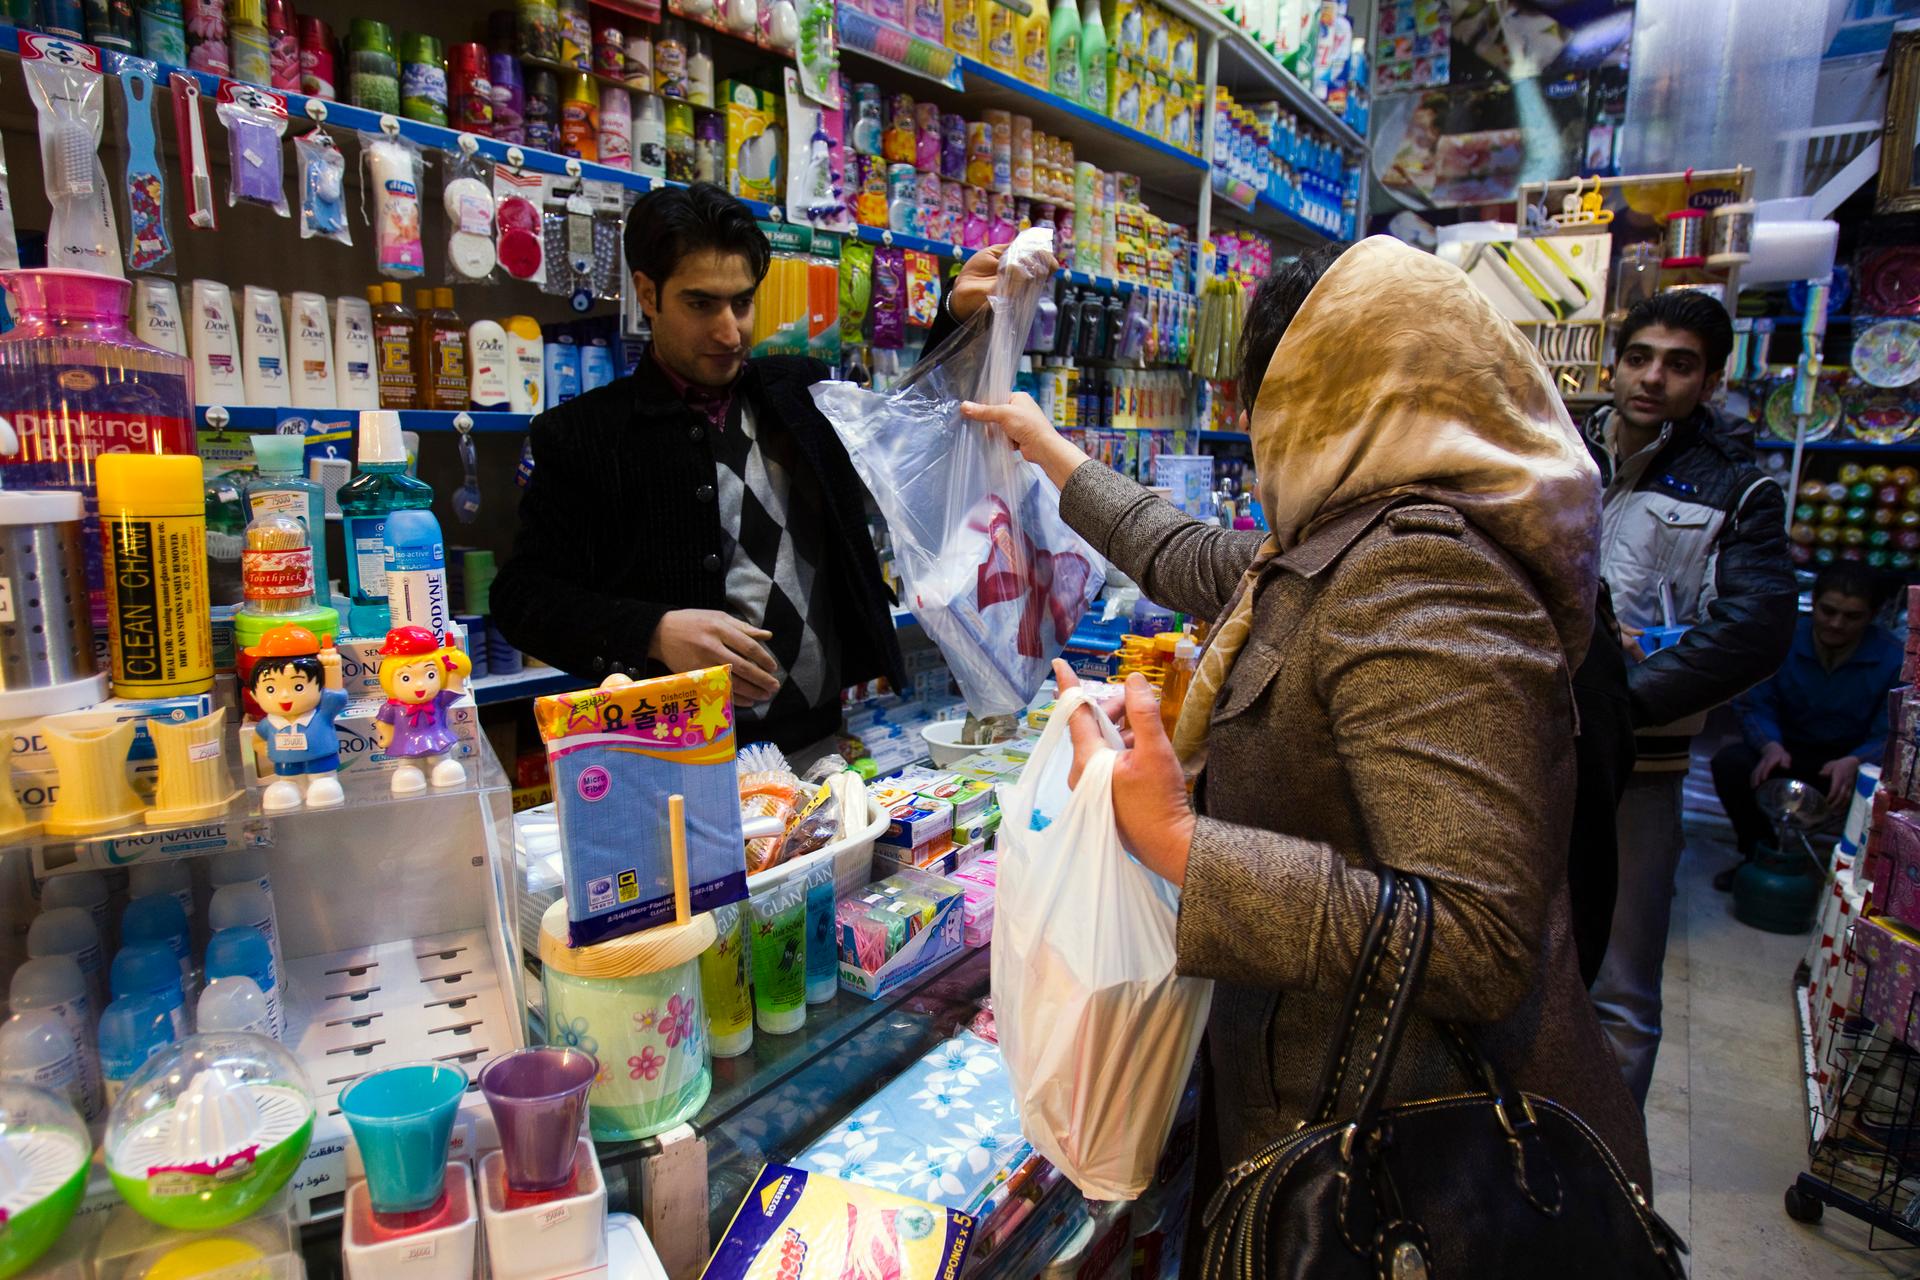 A woman makes a purchase at a store in Tehran.